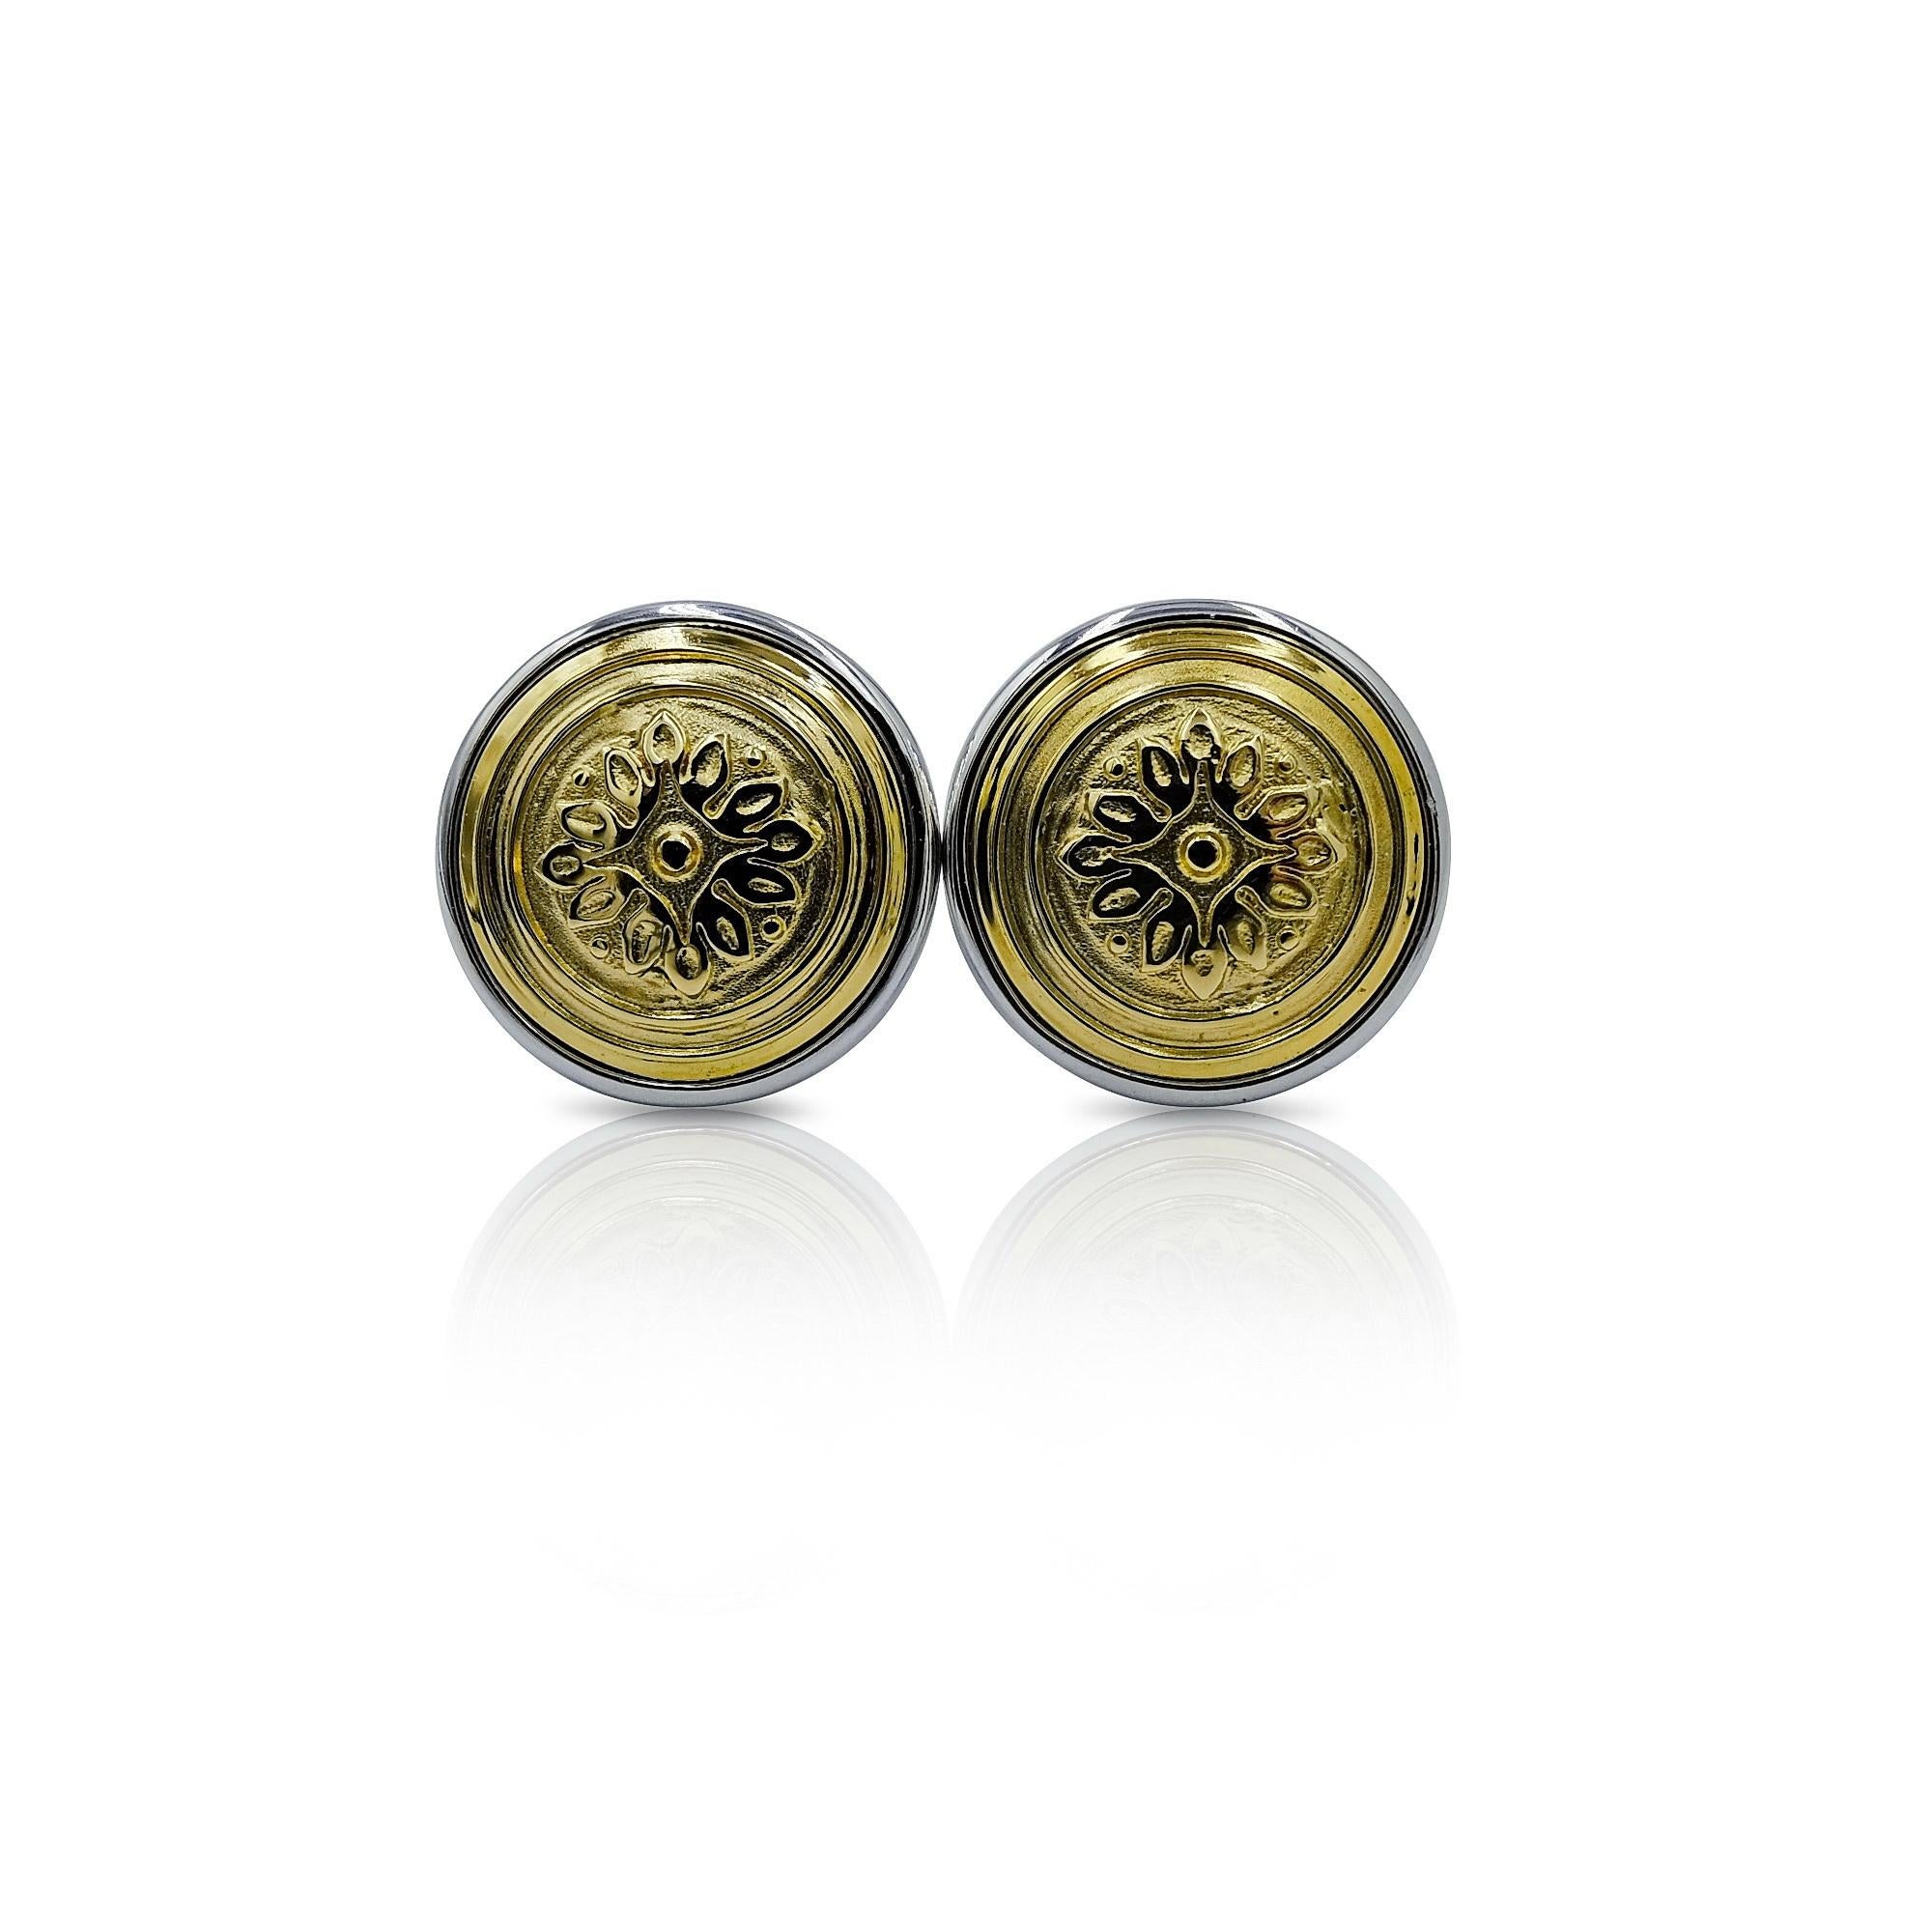 Luca Jouel Decorative Cufflinks Trio in Yellow Gold and Silver For Sale 5